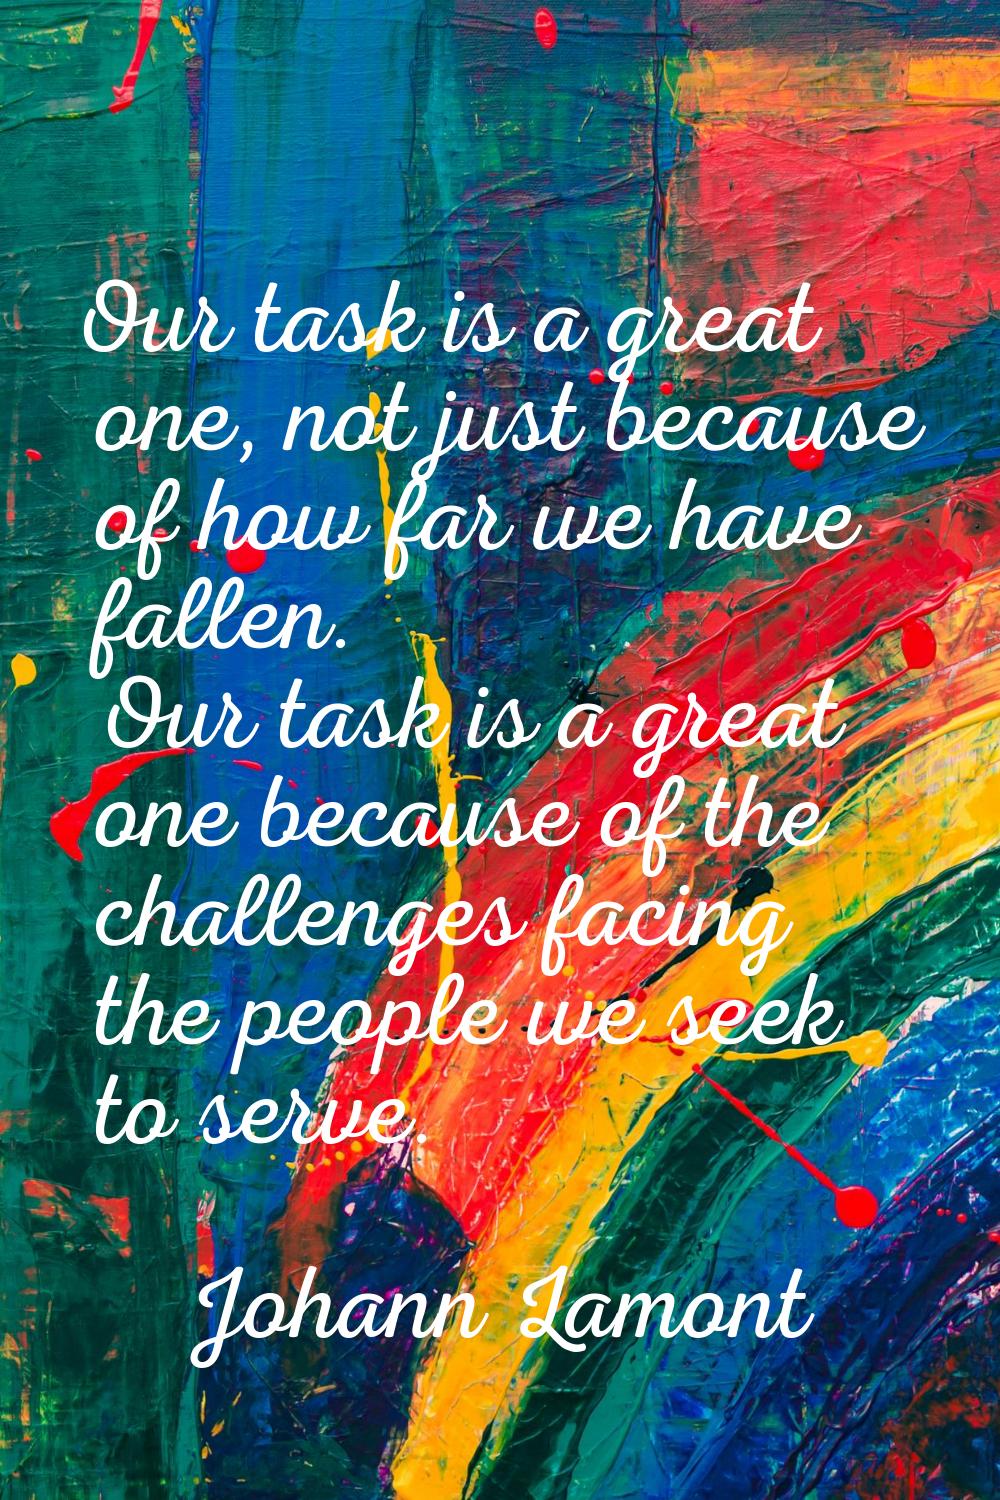 Our task is a great one, not just because of how far we have fallen. Our task is a great one becaus